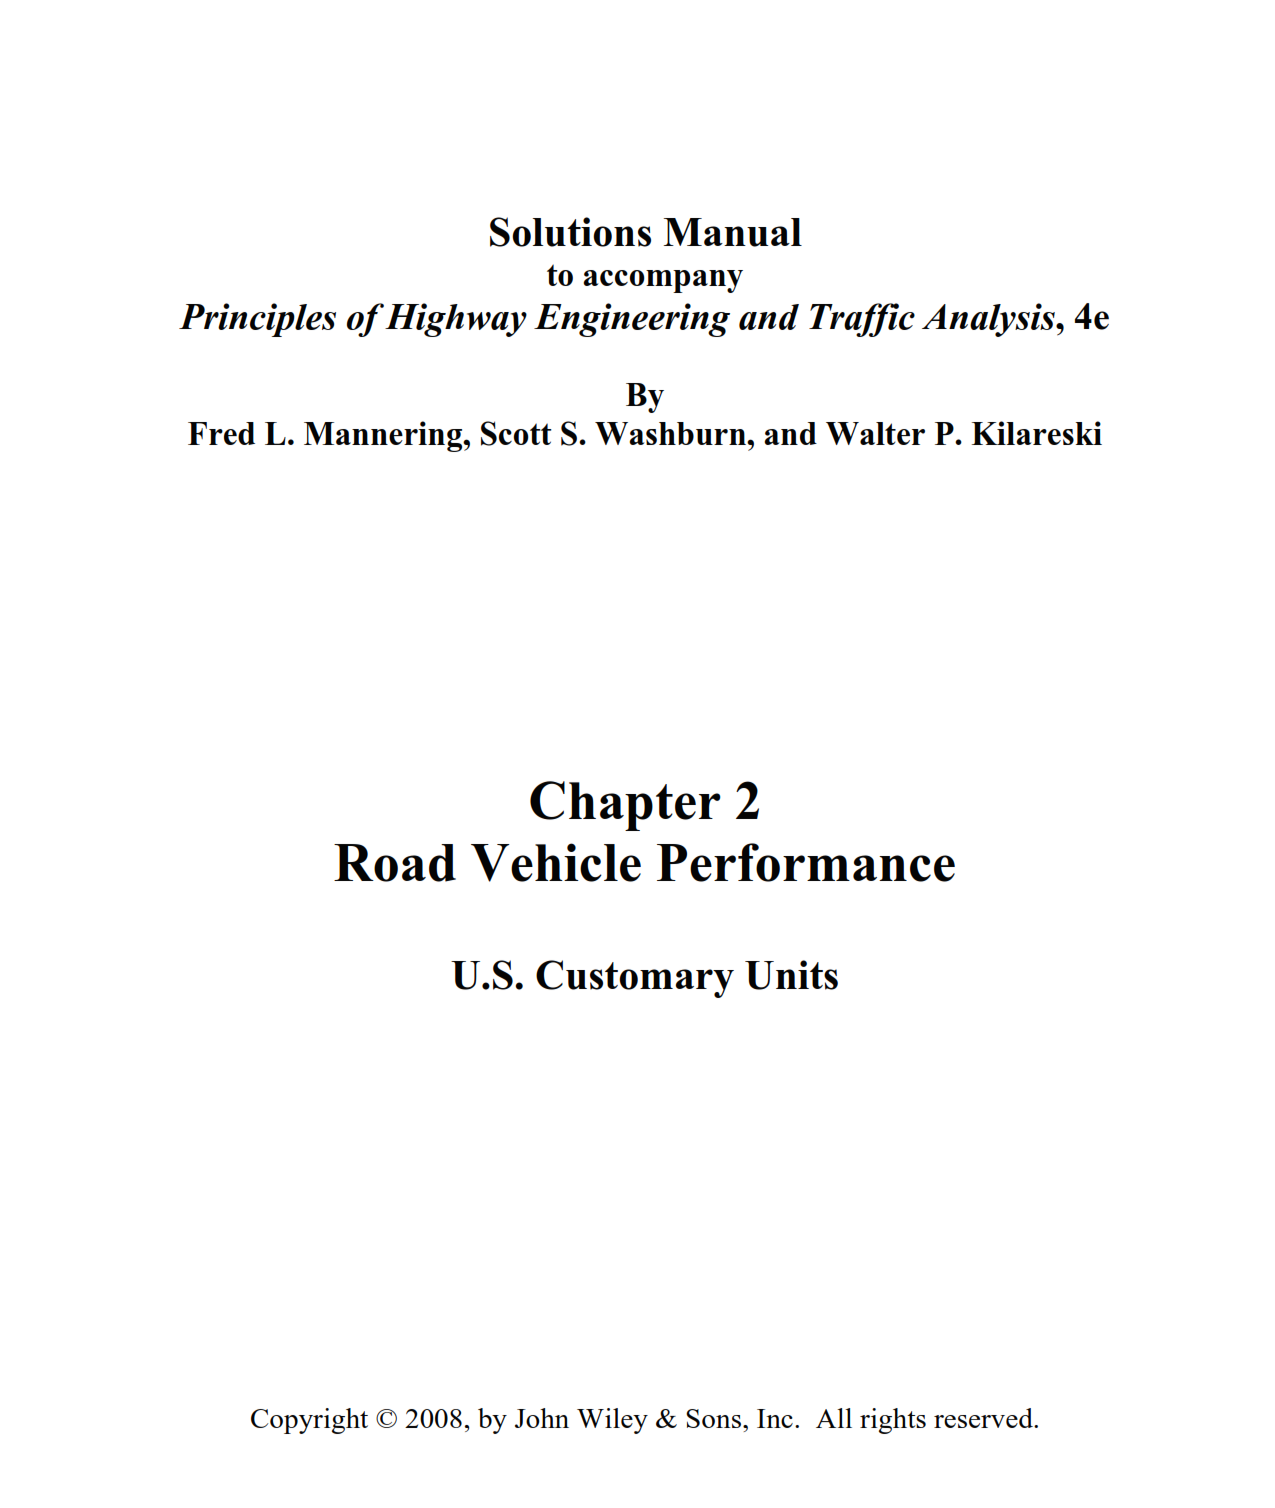 download free principles of highway engineering and traffic analysis 4th edition solutions manual & answers written by Mannering eBook pdf Fred L. Mannering , Scott S. Washburn , Walter P. Kilareski